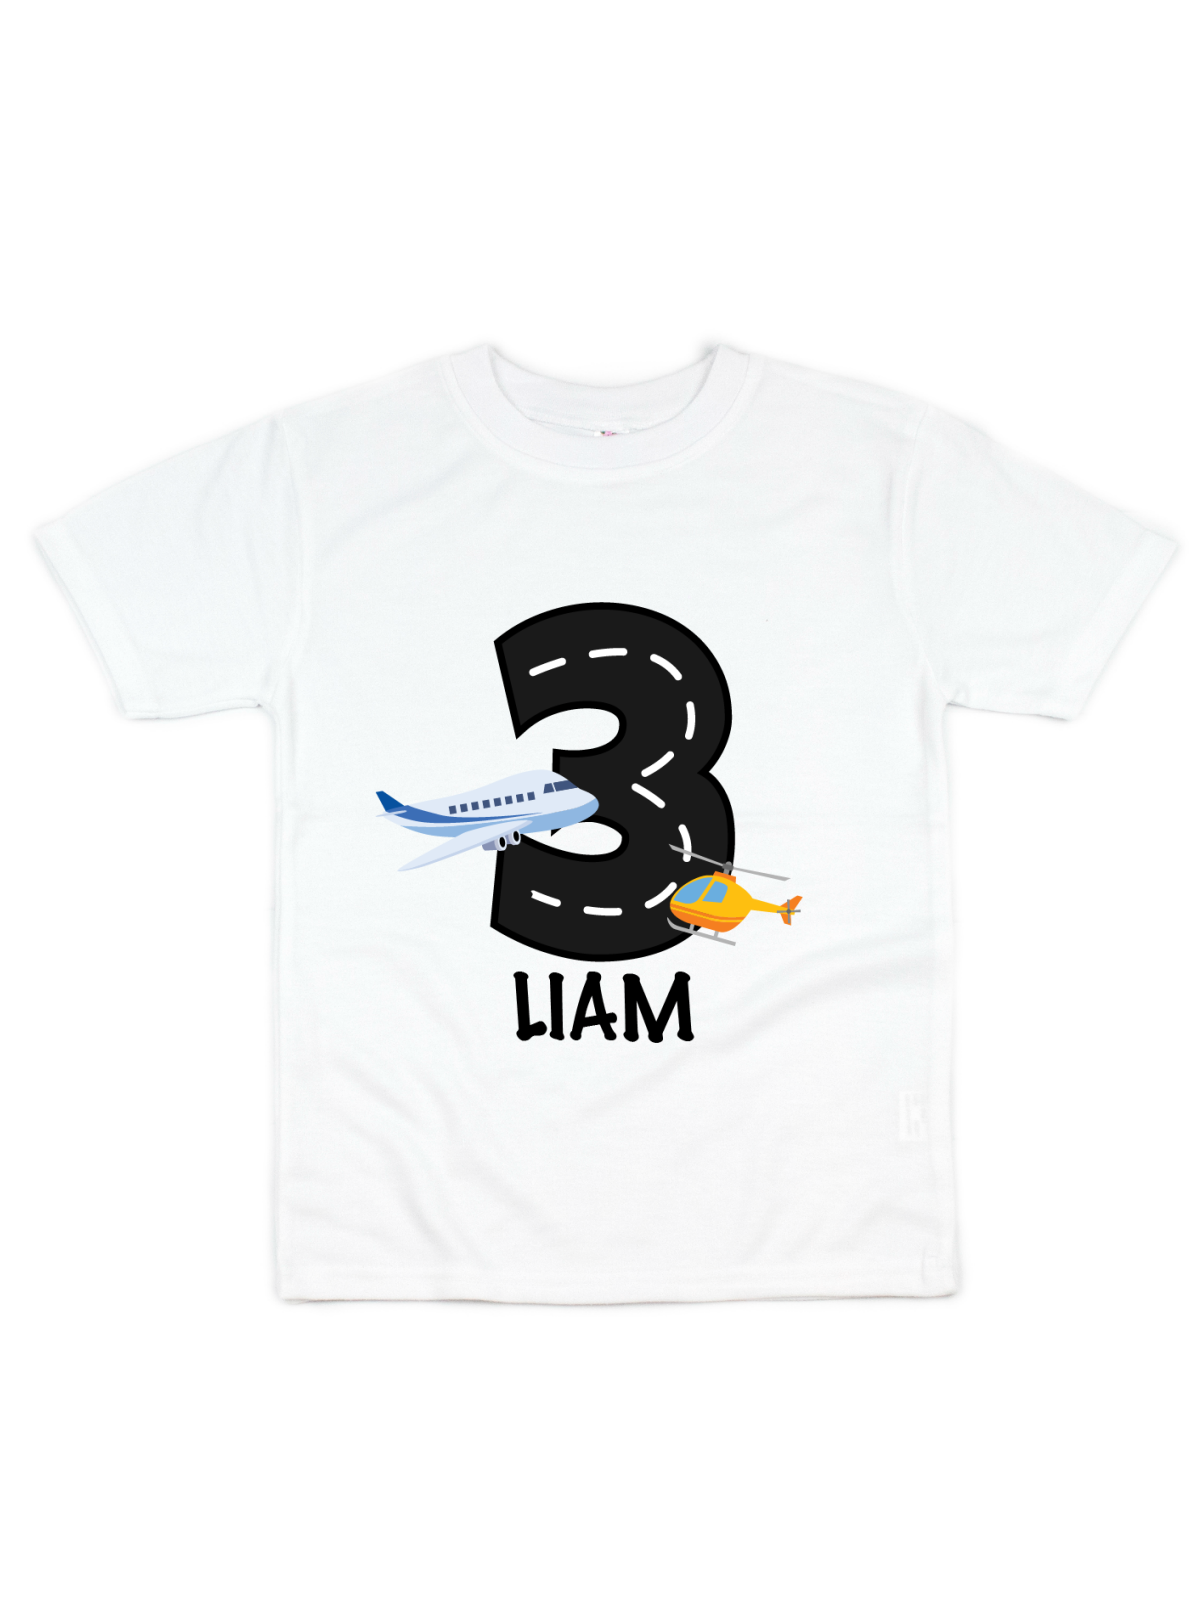 Airplane and Helicopter Birthday Shirt - White & Gray